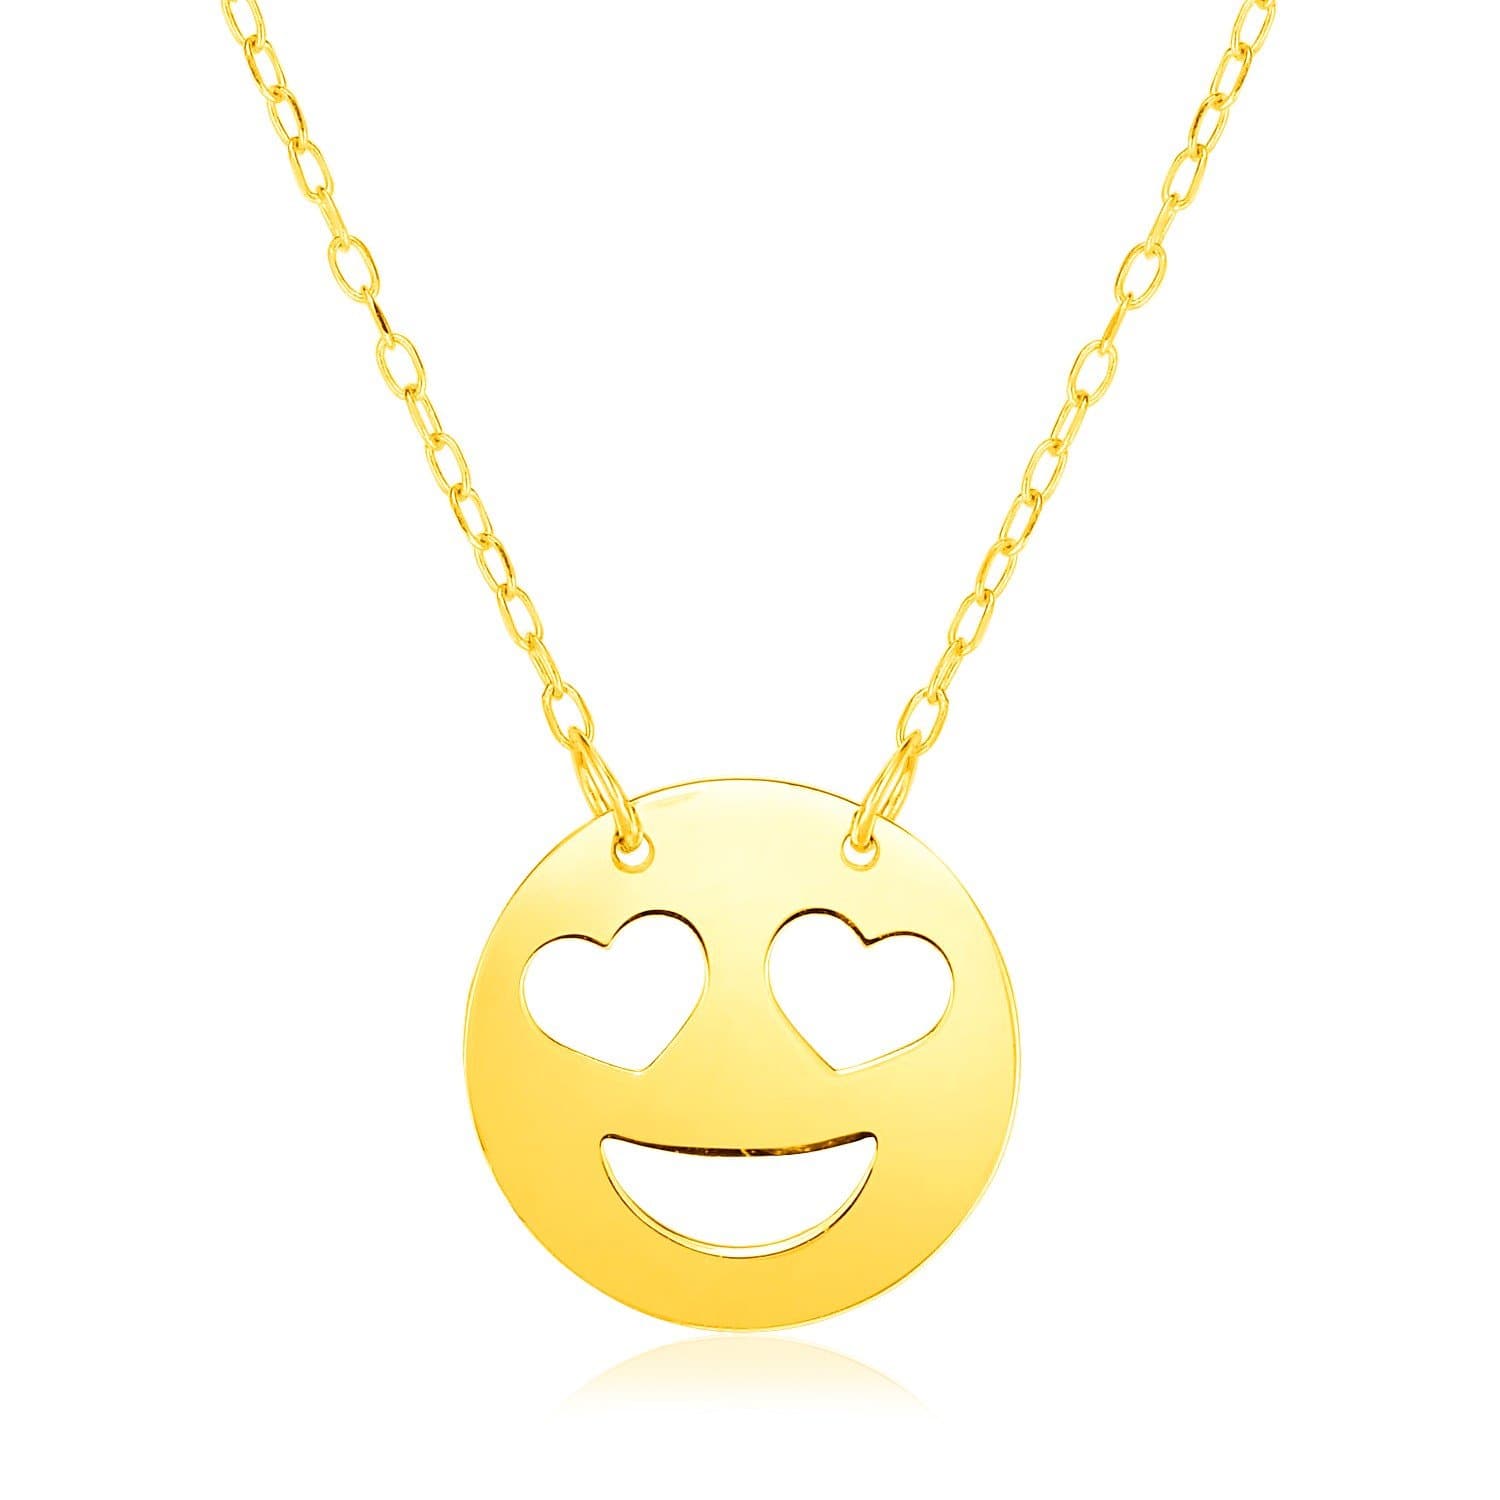 14k Yellow Gold Necklace with Love Emoji Symbol